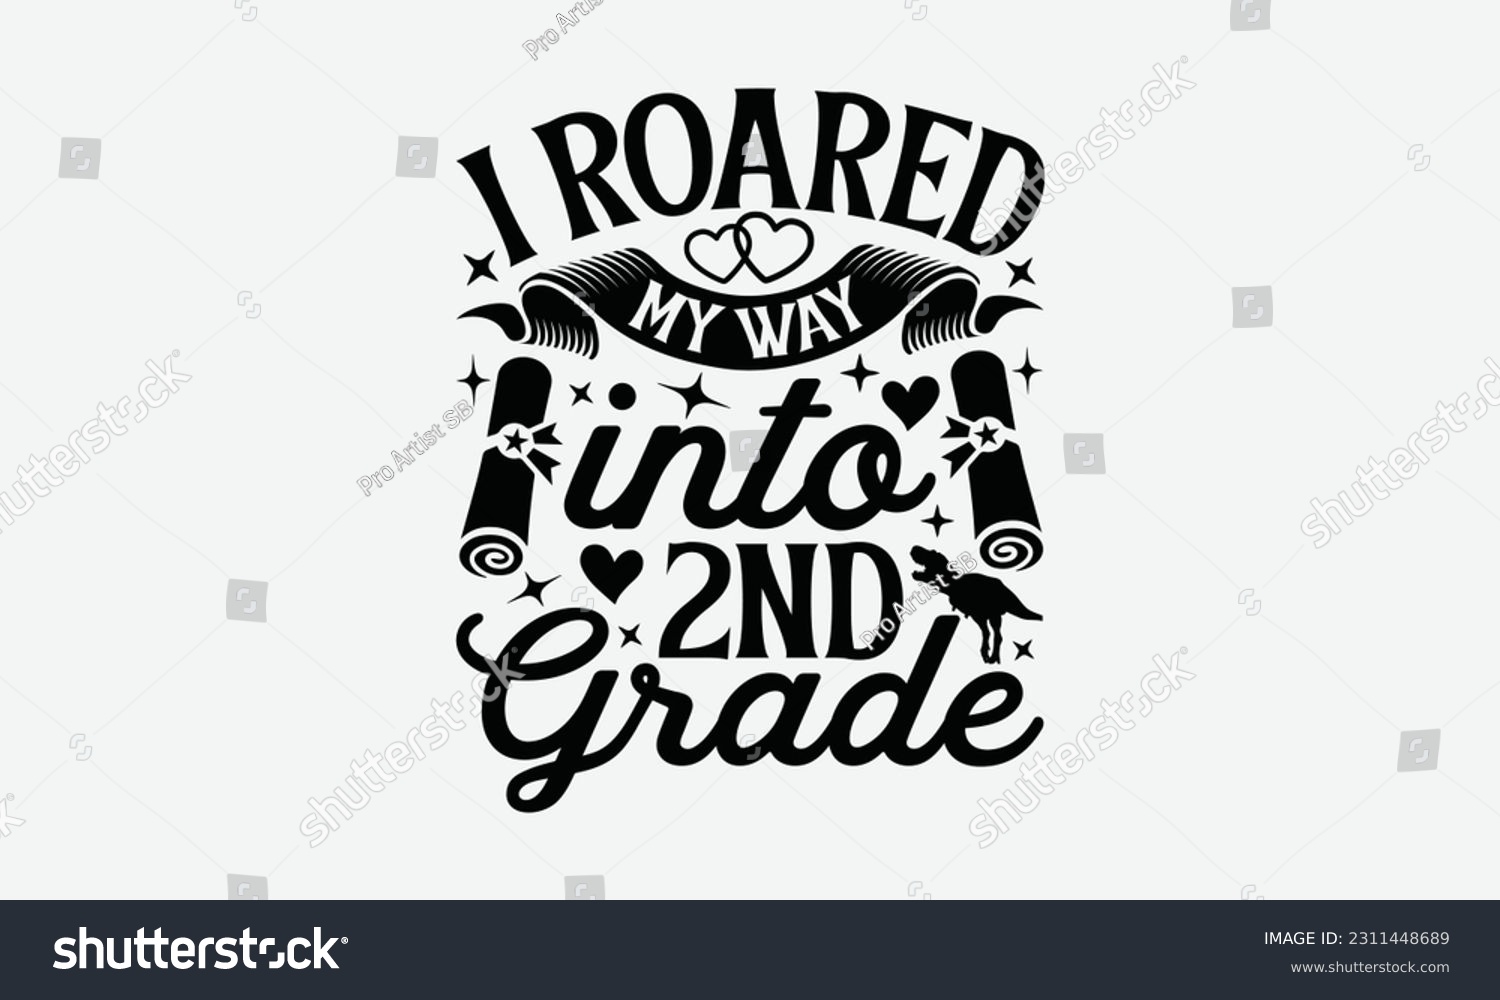 SVG of I Roared My Way Into 2nd Grade - Dinosaur SVG Design, Motivational Inspirational T-shirt Quotes, Hand Drawn Vintage Illustration With Hand-Lettering And Decoration Elements. svg